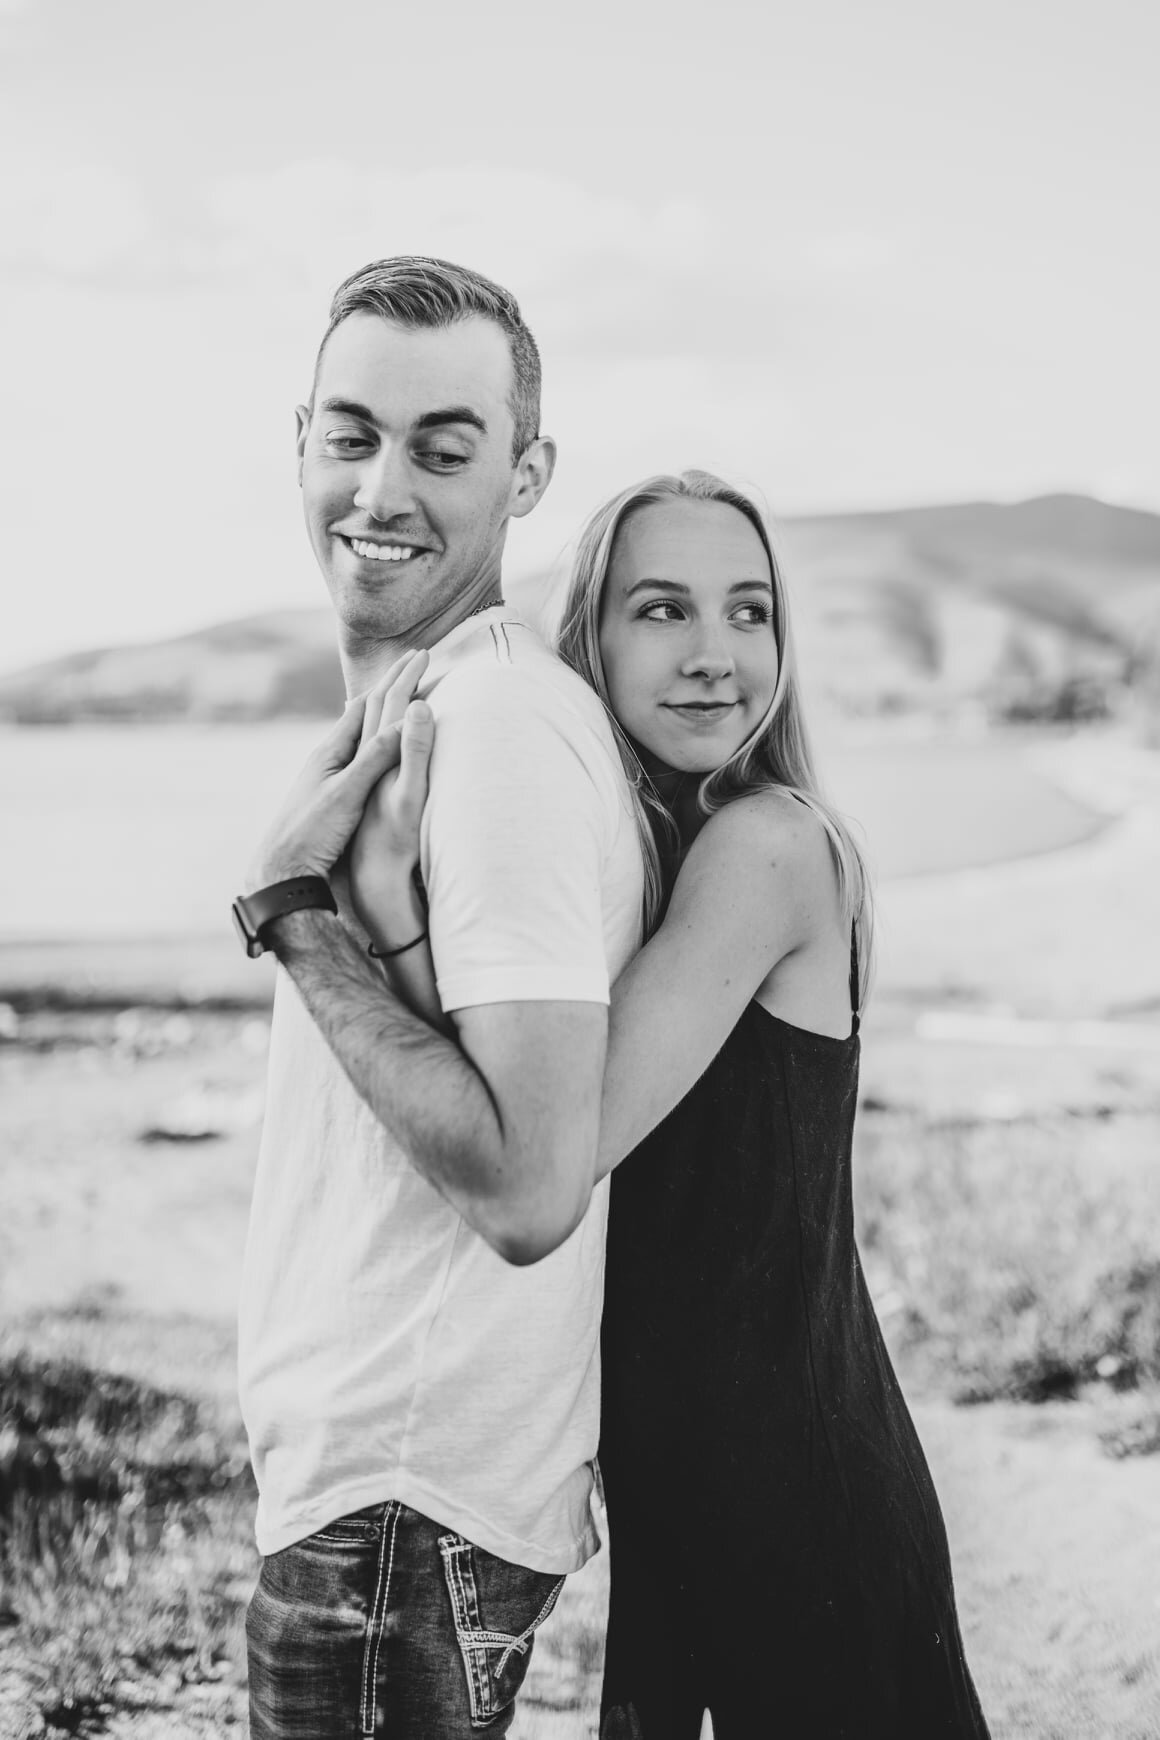 10 TIPS TO MAKE COUPLES FEEL MORE COMFORTABLE IN FRONT OF THE CAMERA